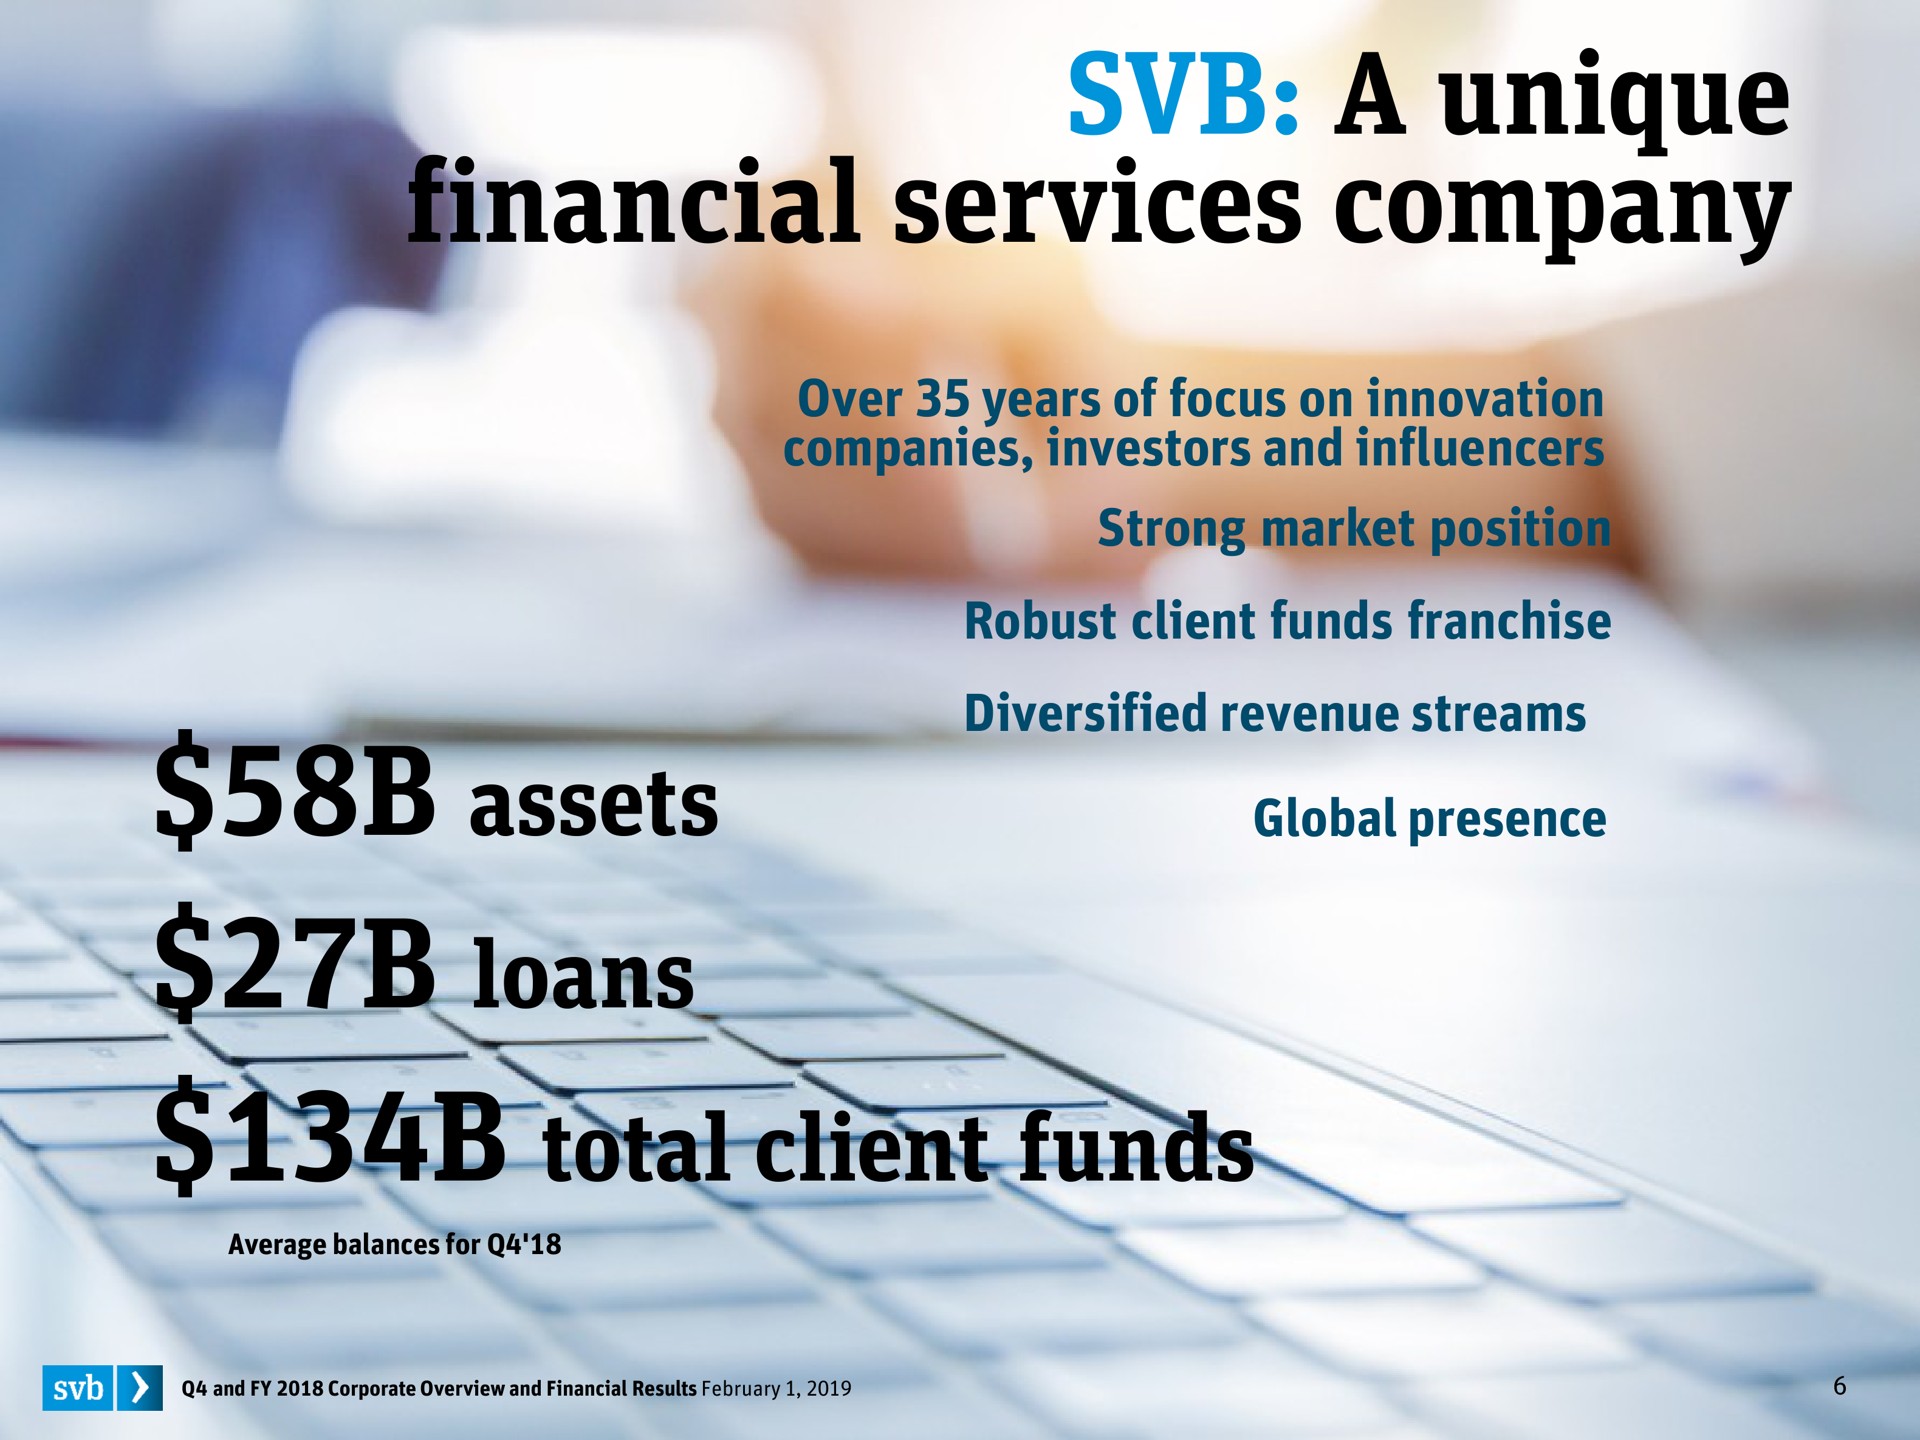 a unique financial services company assets loans total client funds | Silicon Valley Bank